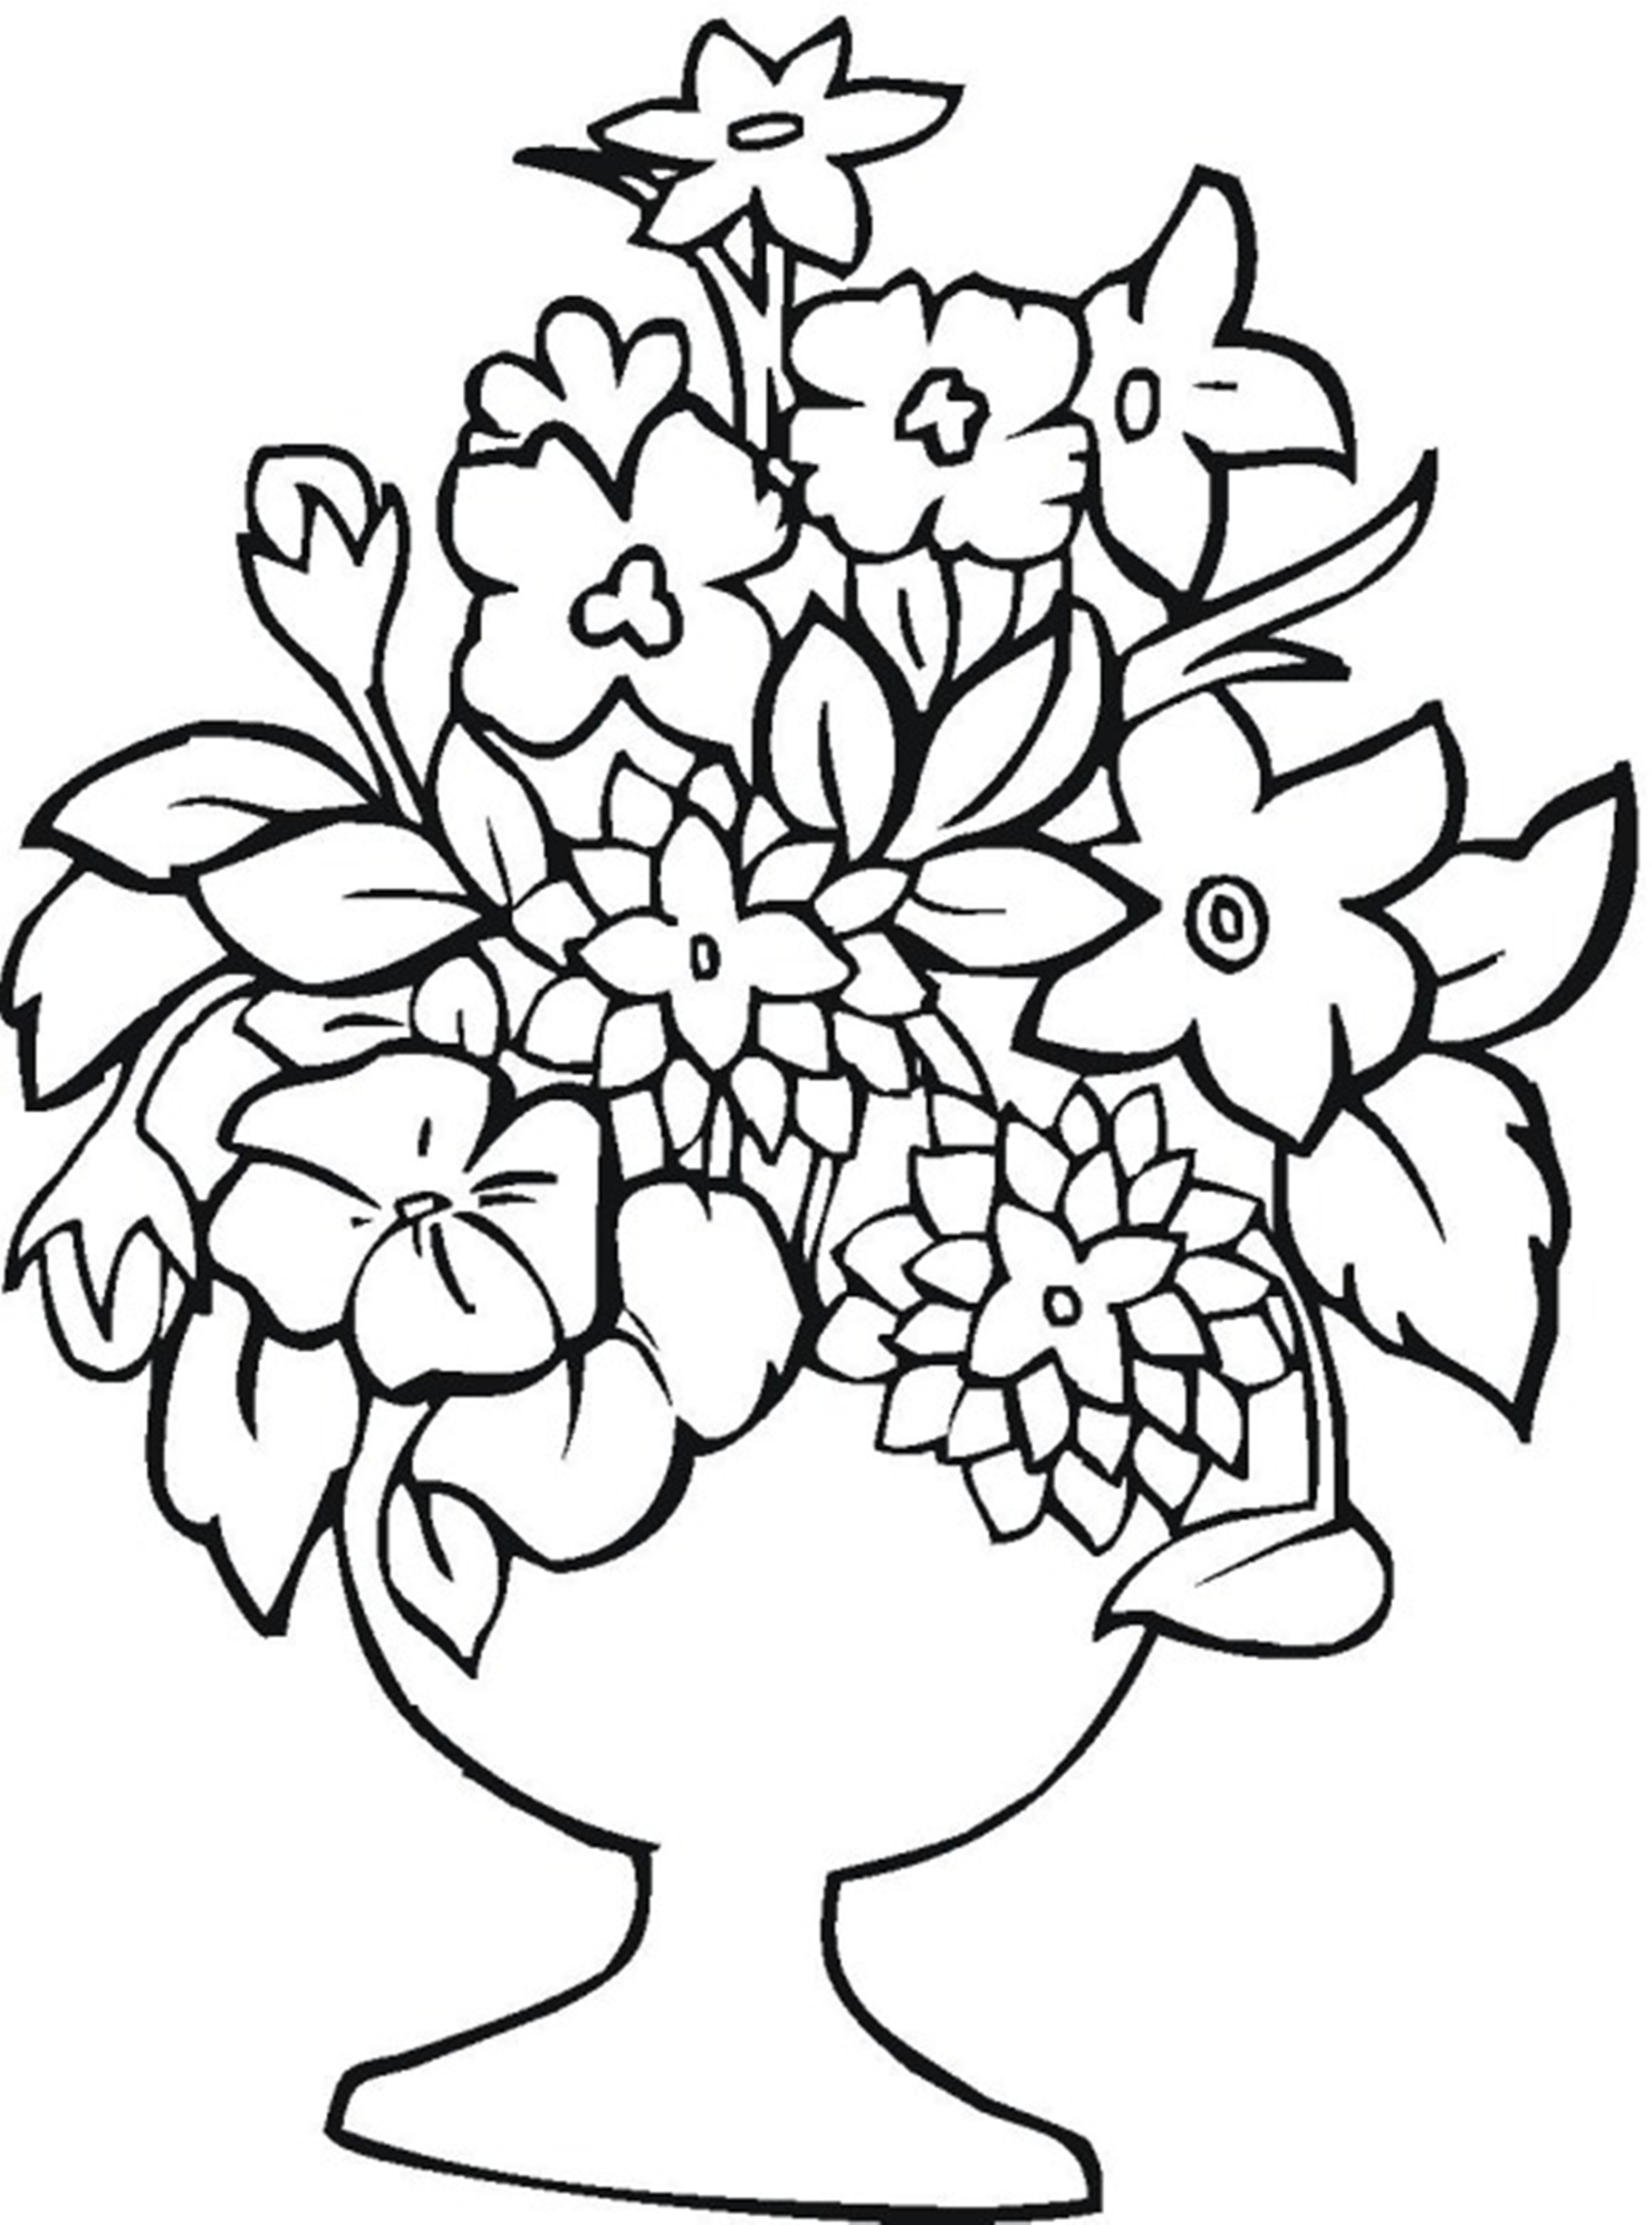 banner-with-flowers-coloring-pages-coloring-pages